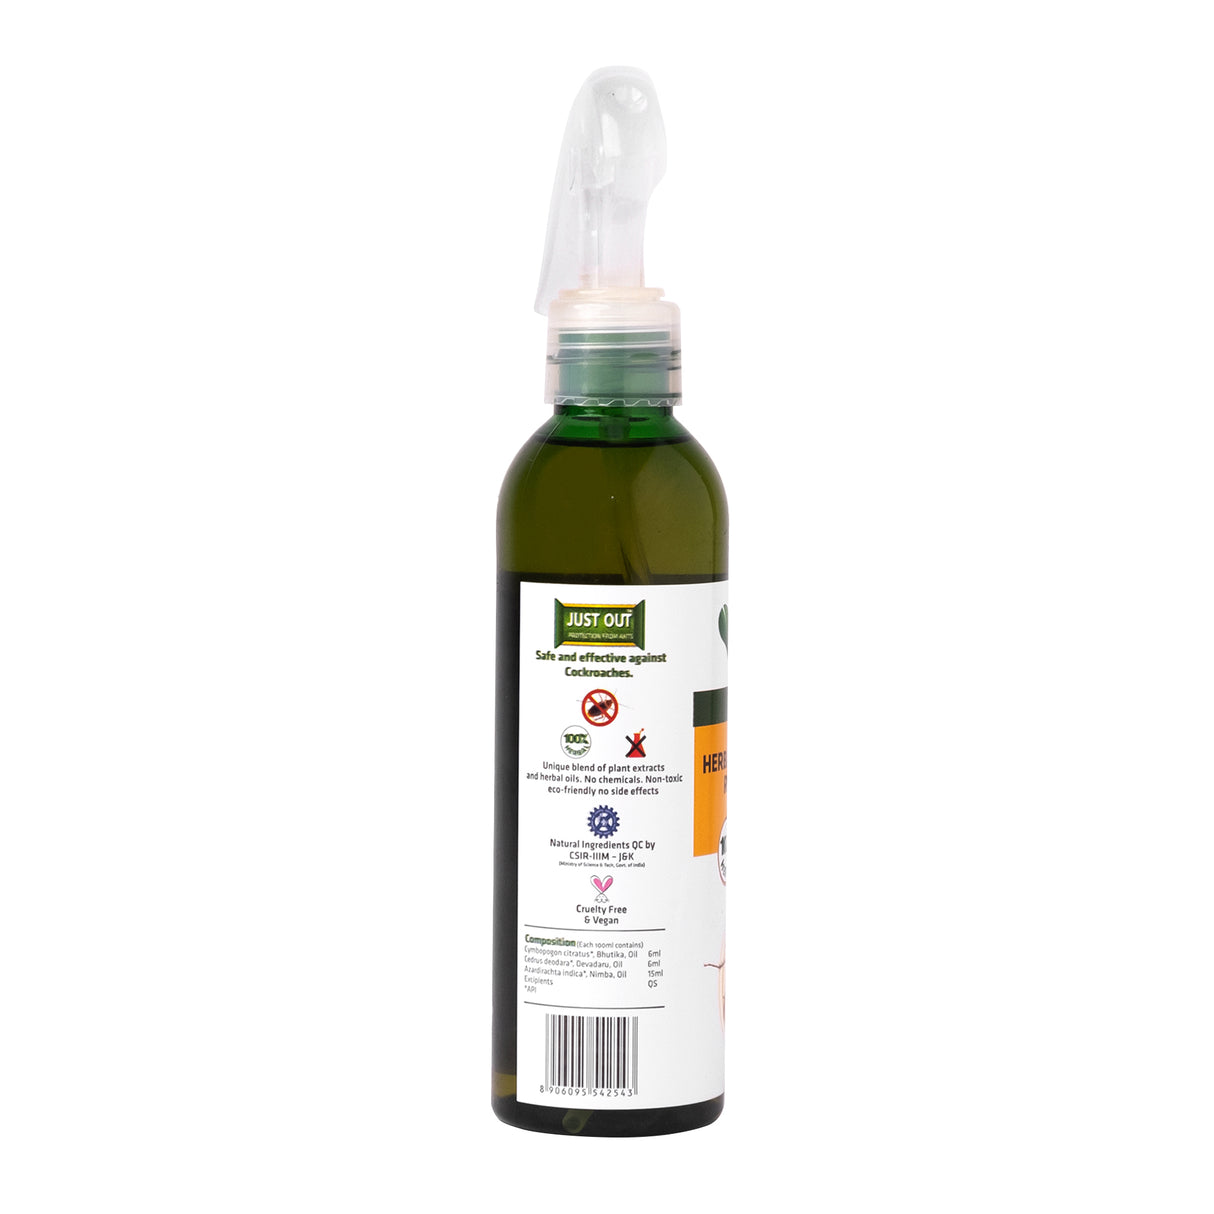 Herbal Cockroach Repellent | Product Size: 100 ml, 200 ml, 500 ml, 5 ltrs